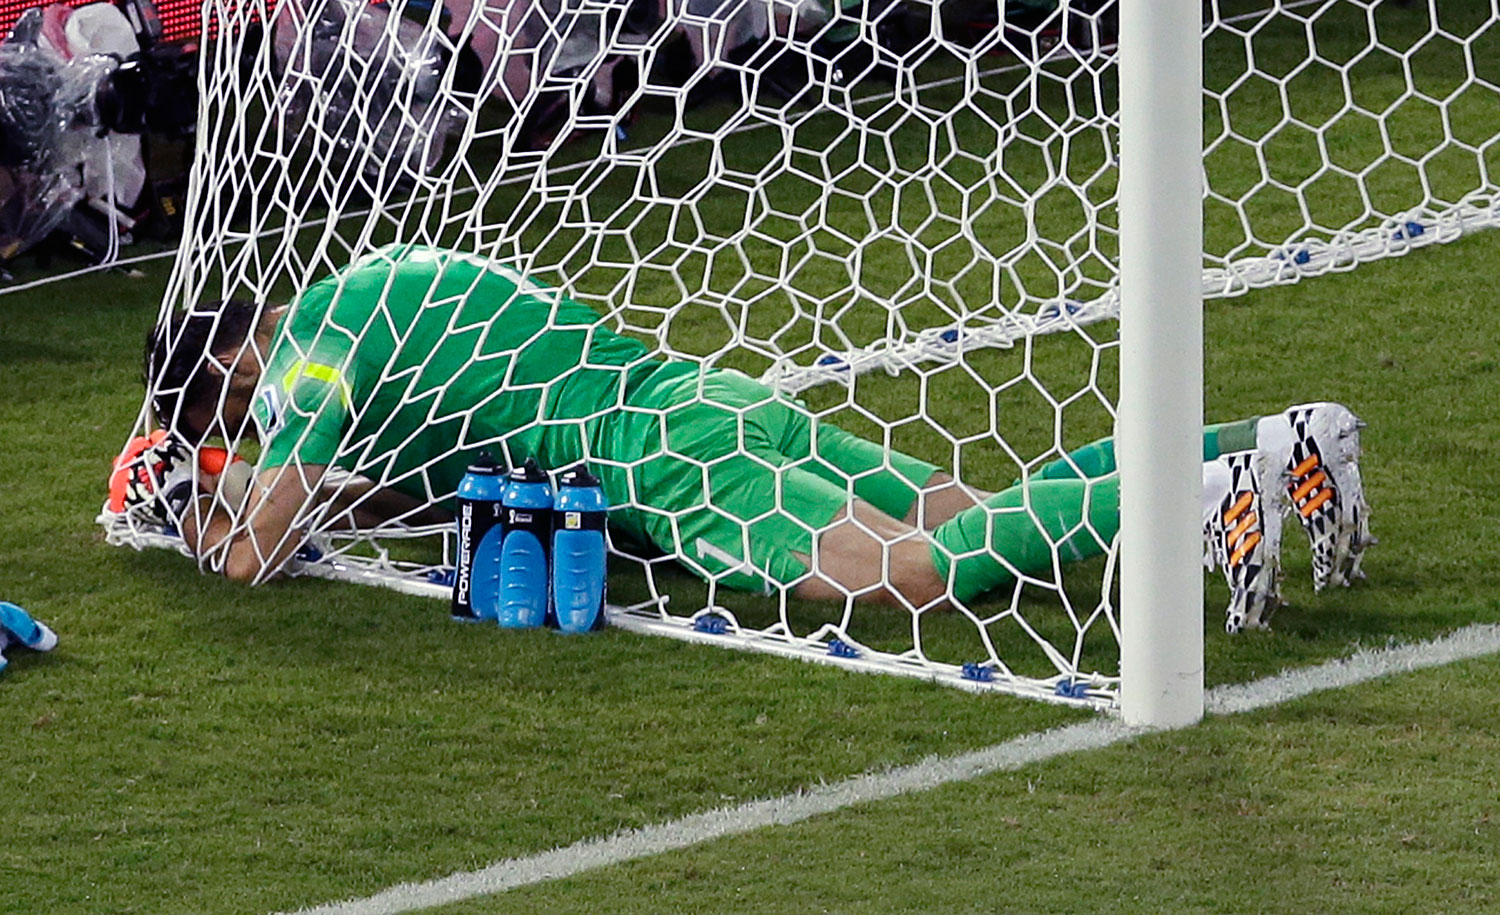 Greece's goalkeeper Orestis Karnezis sits in the net during the group C World Cup soccer match between Japan and Greece at the Arena das Dunas in Natal, Brazil on June 19, 2014.